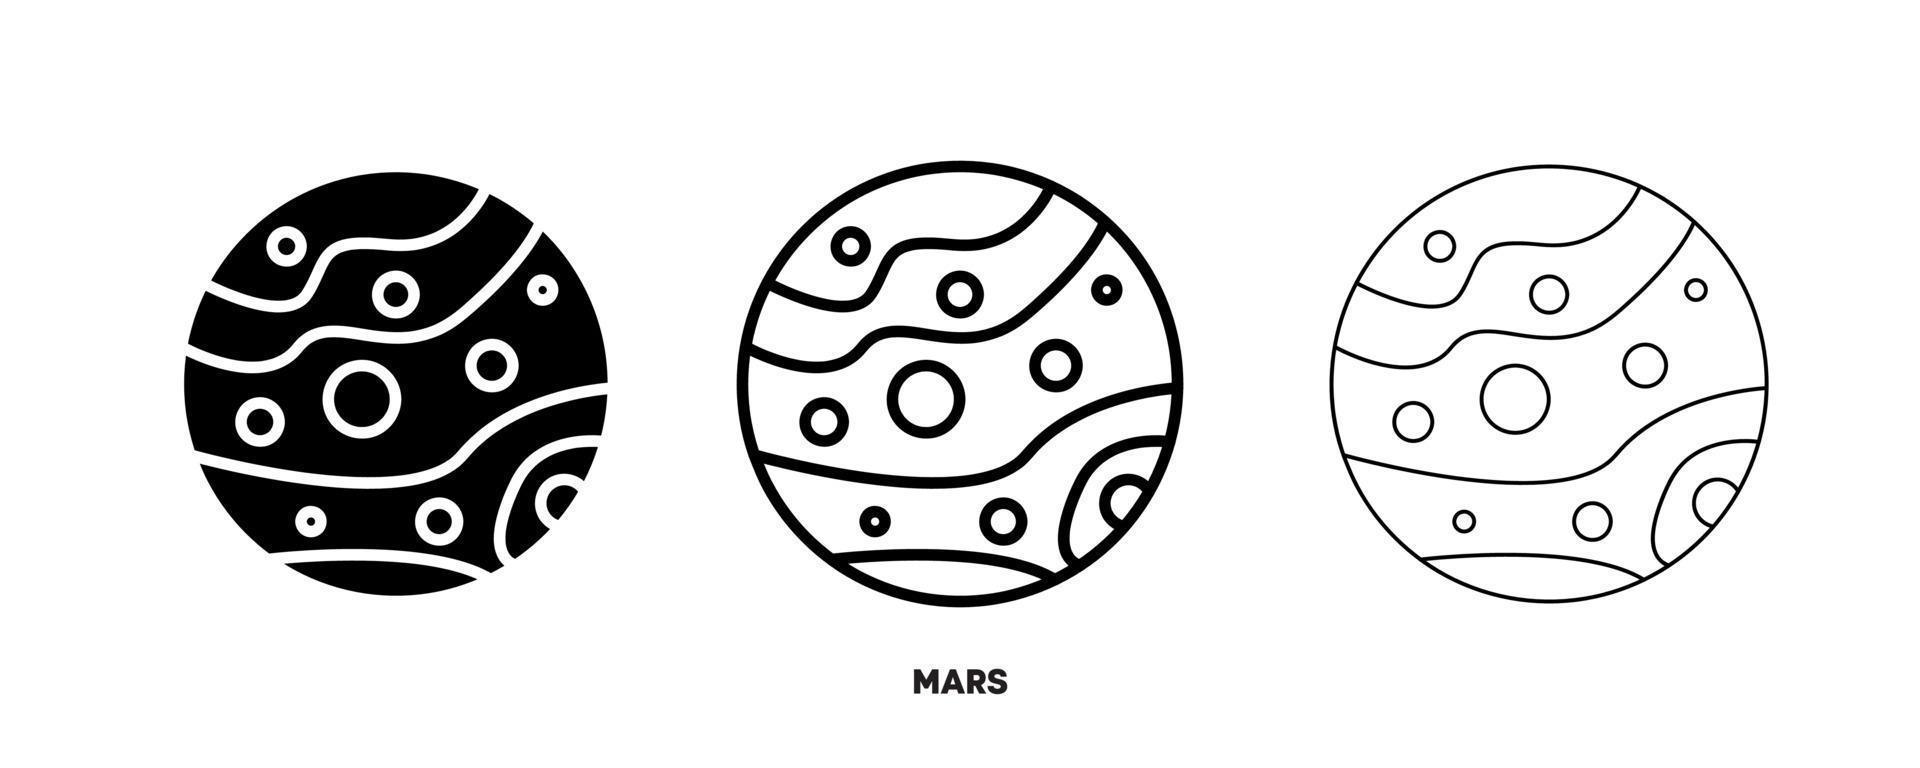 Mars planet icon vector. Simple planet Mars sign in modern design style and logo art for website and mobile app. Editable drawing and silhouette in one. vector